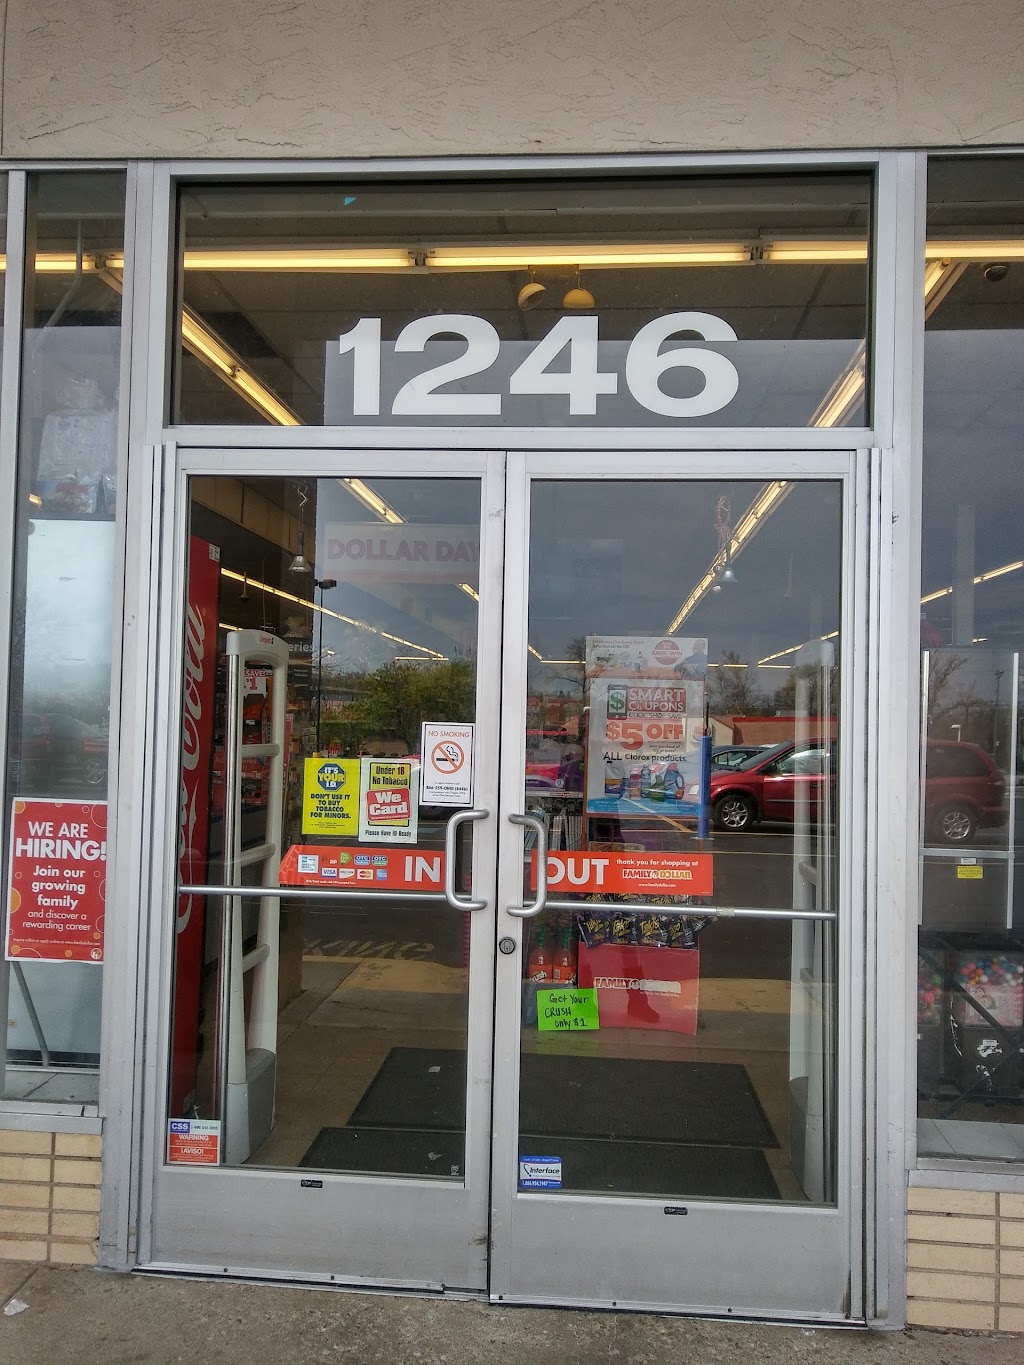 Family Dollar | 1246 E Central Ave, Miamisburg, OH 45342 | Phone: (937) 388-7785